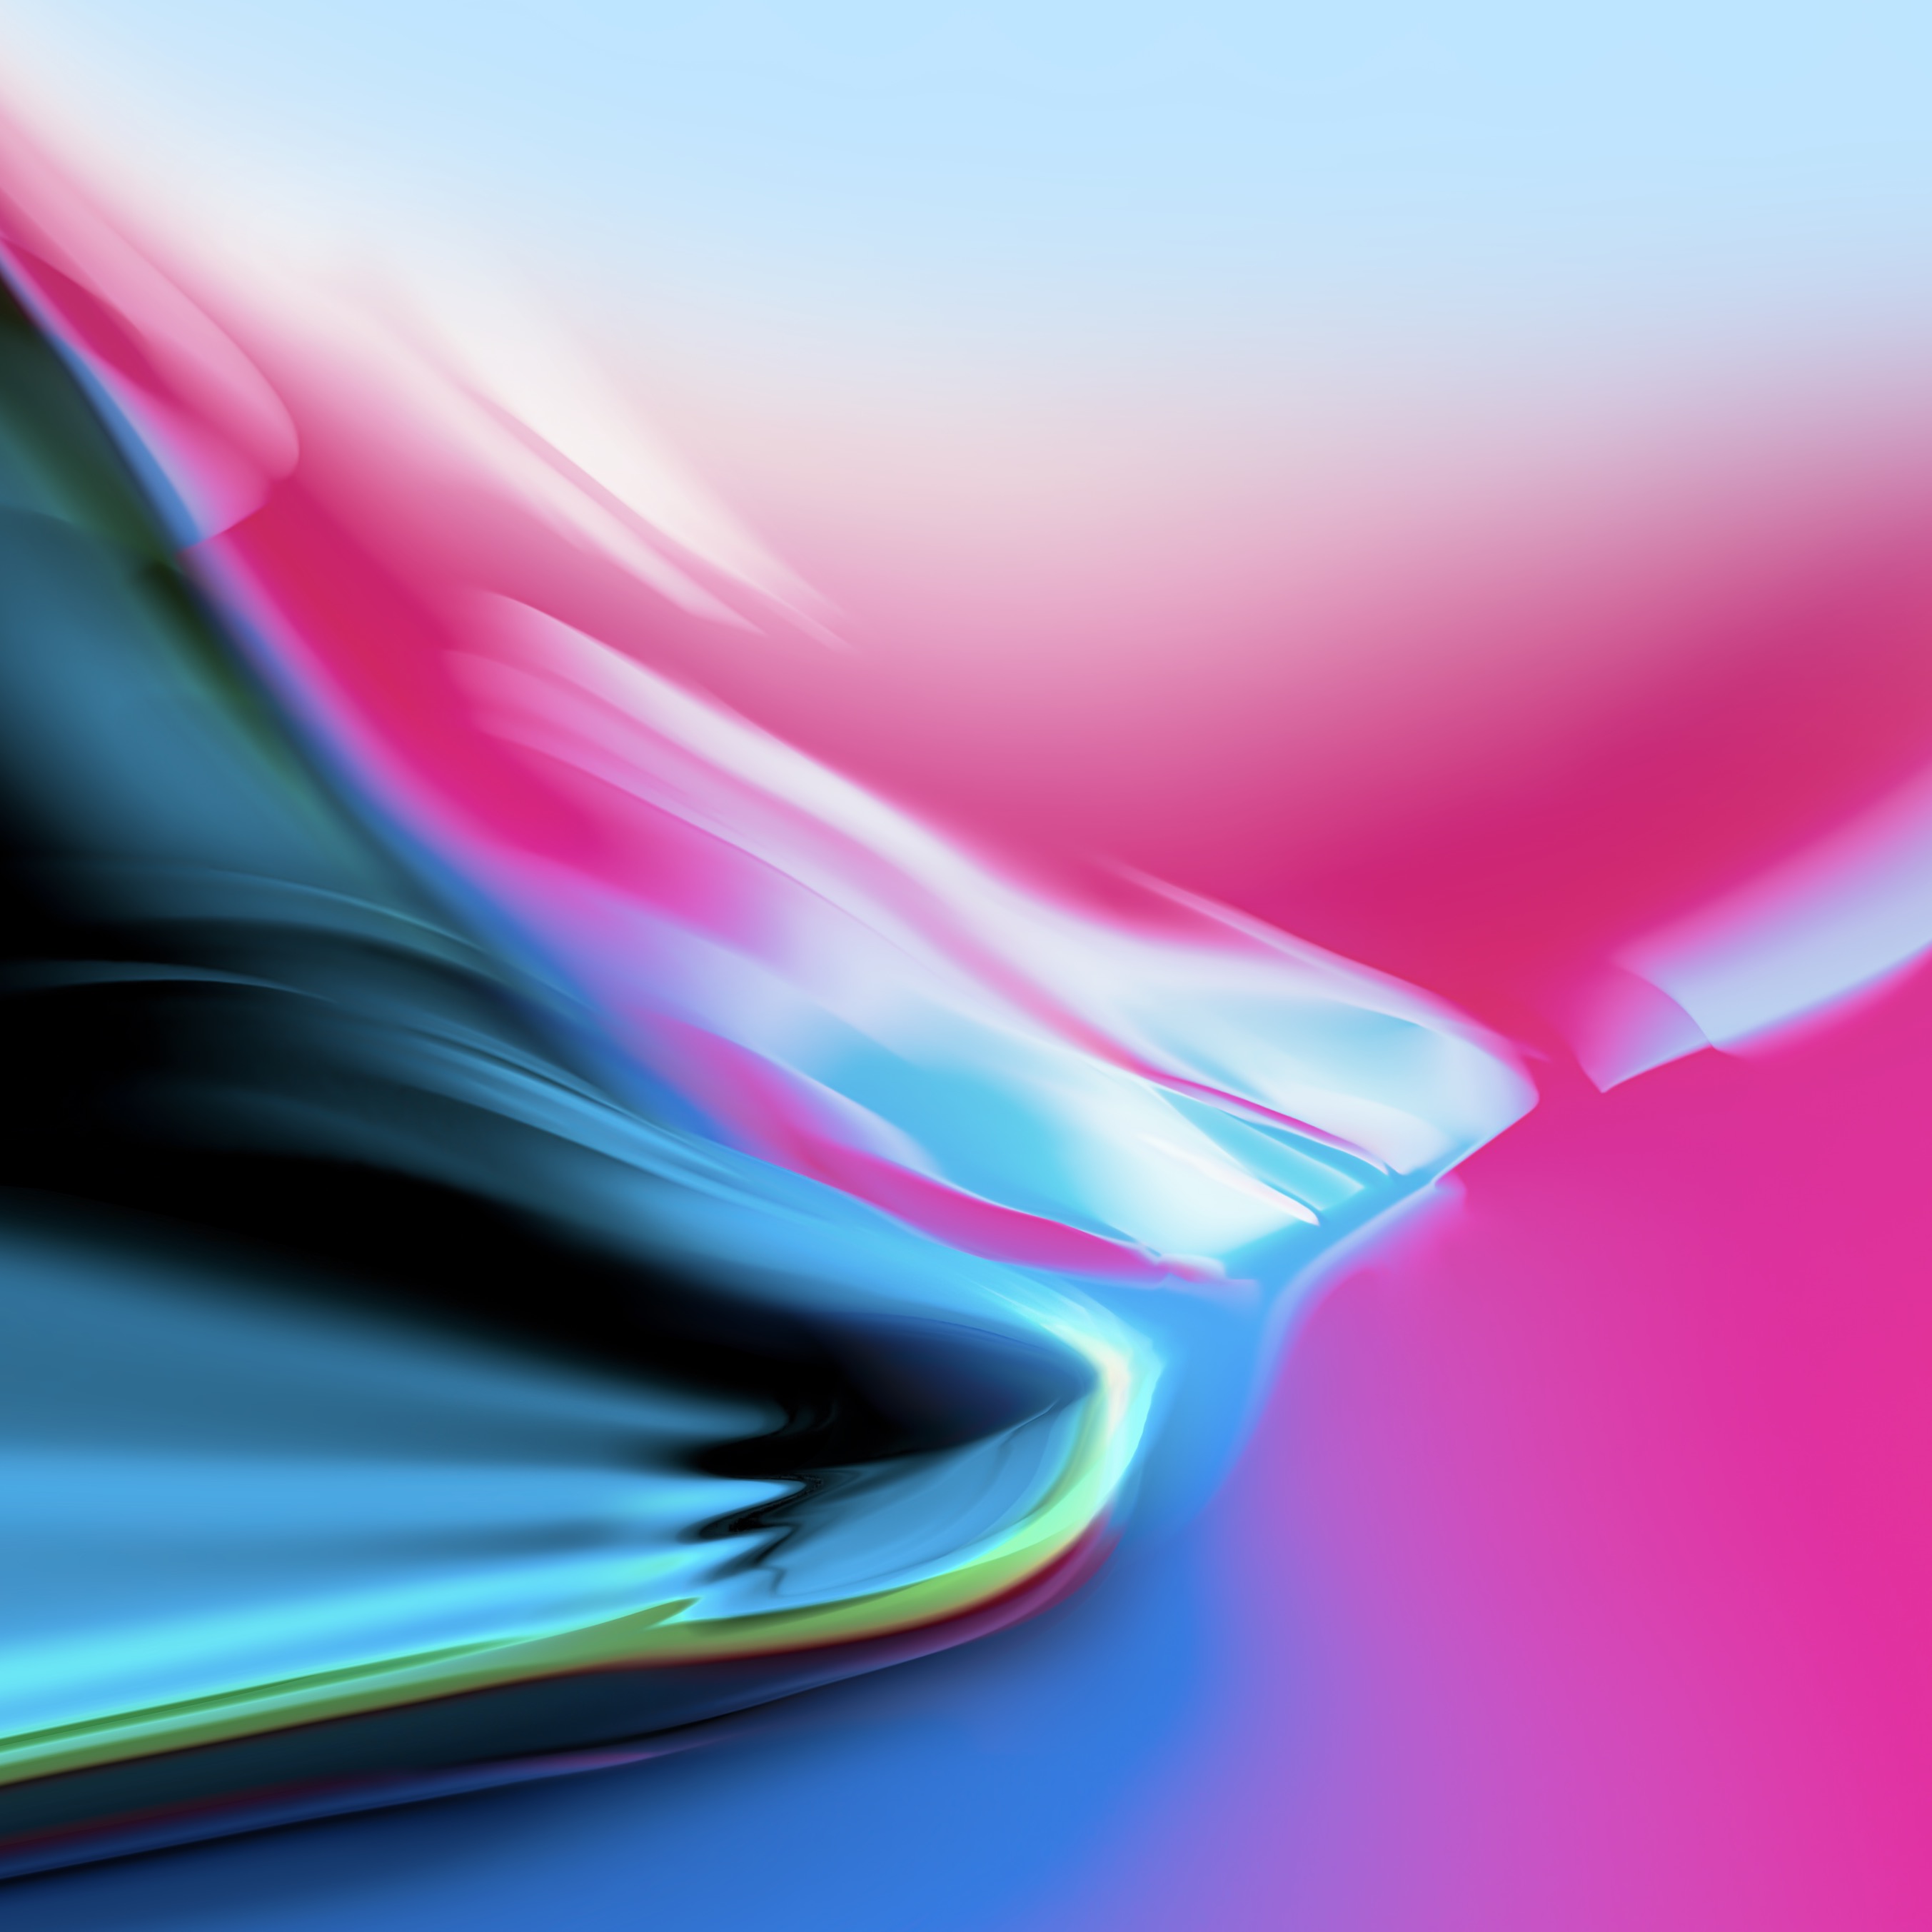 iPhone 8 Wallpapers Leaked 2706x2706